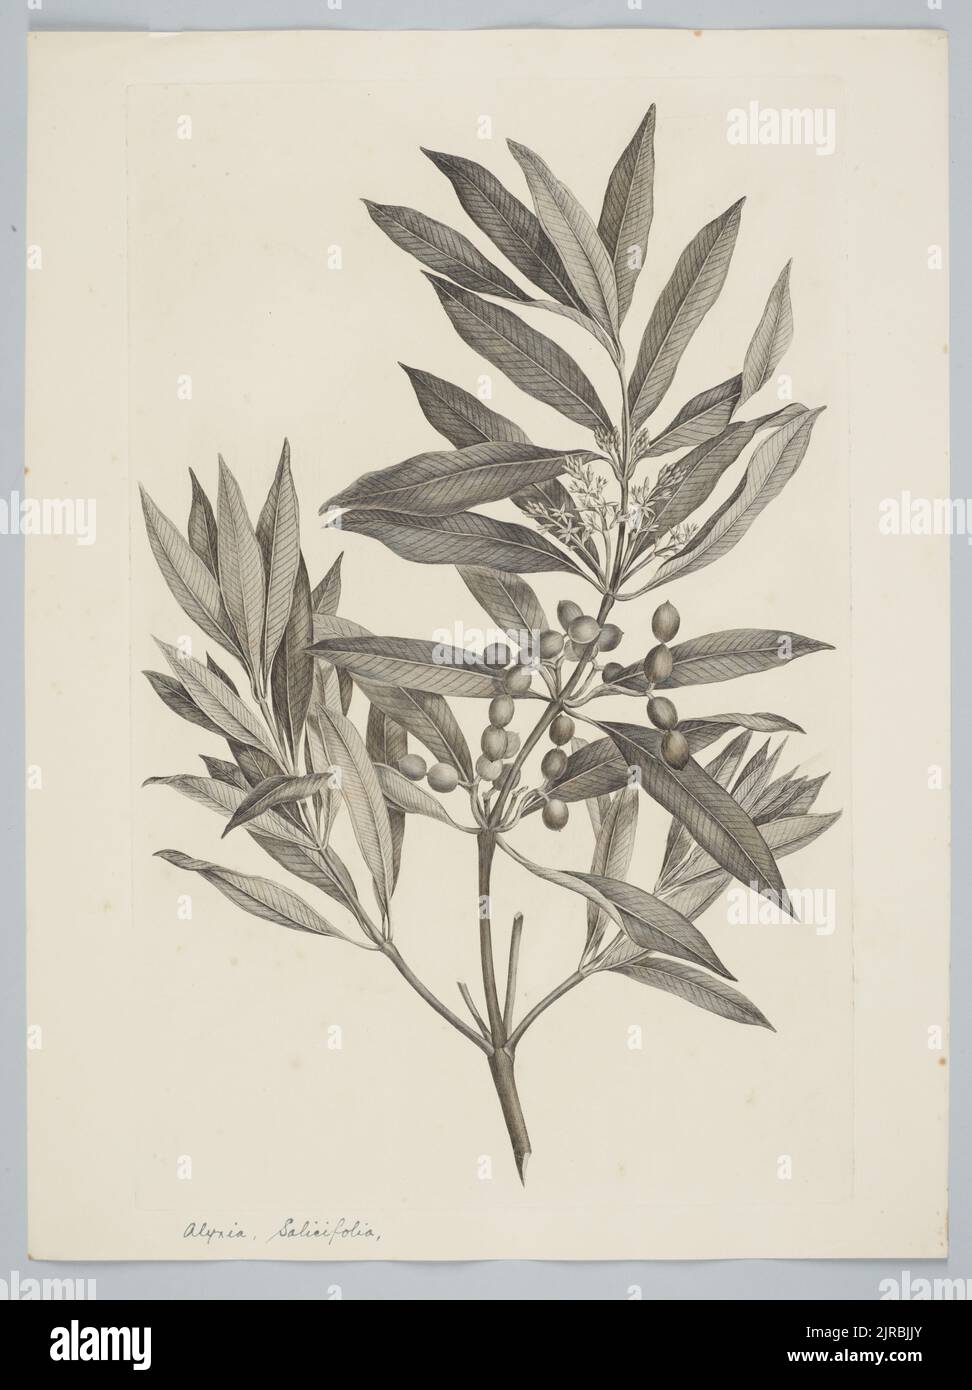 Alyxia spicata R. Brown, by Sydney Parkinson. Gift of the British Museum, 1895. Stock Photo